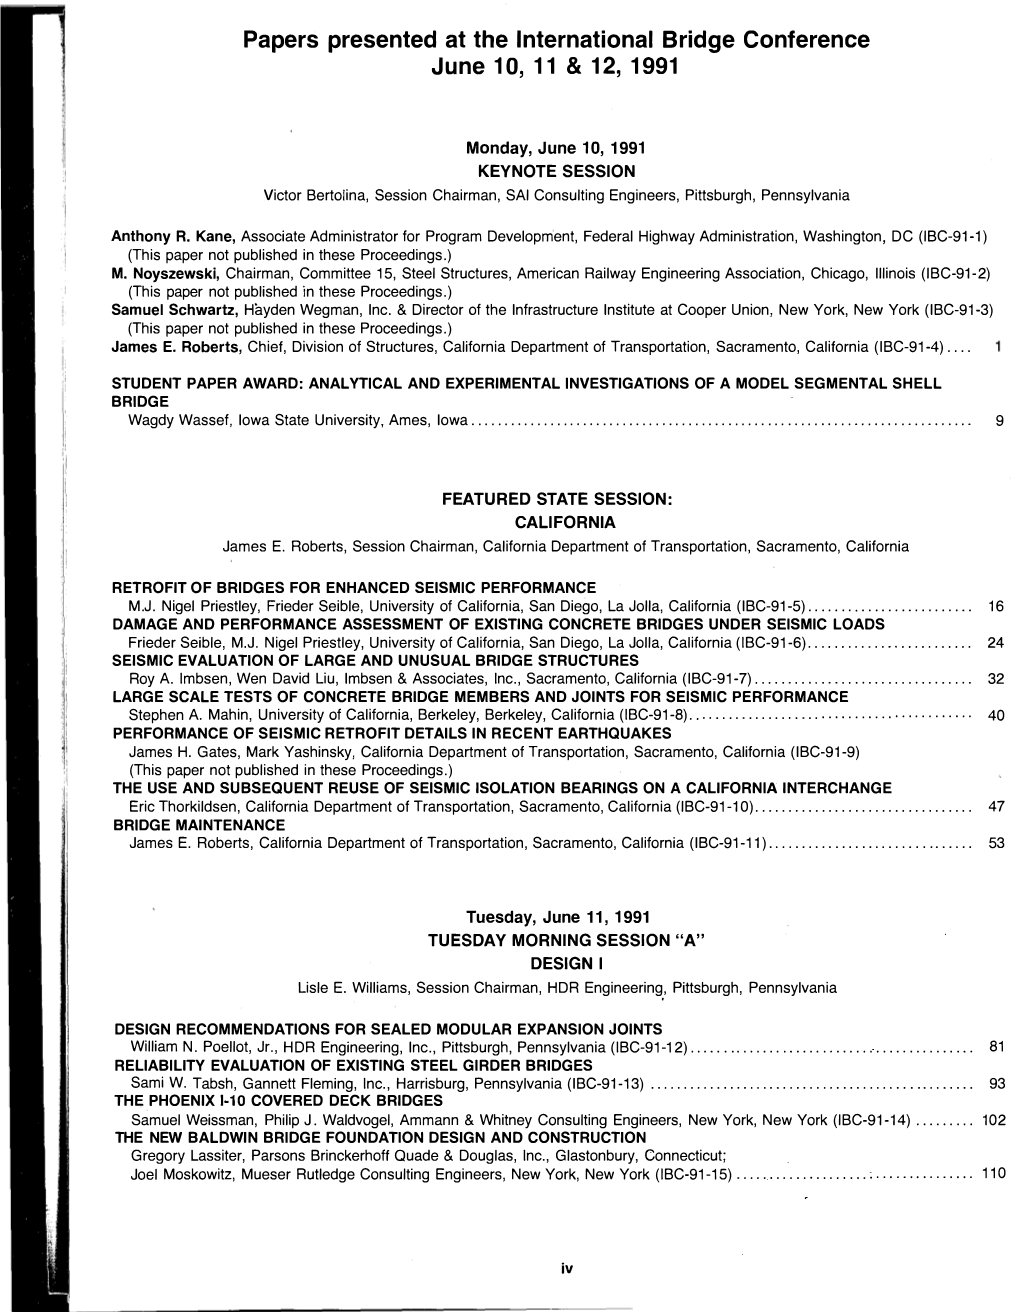 Papers Presented at the International Bridge Conference June 10, 11 & 12, 1991